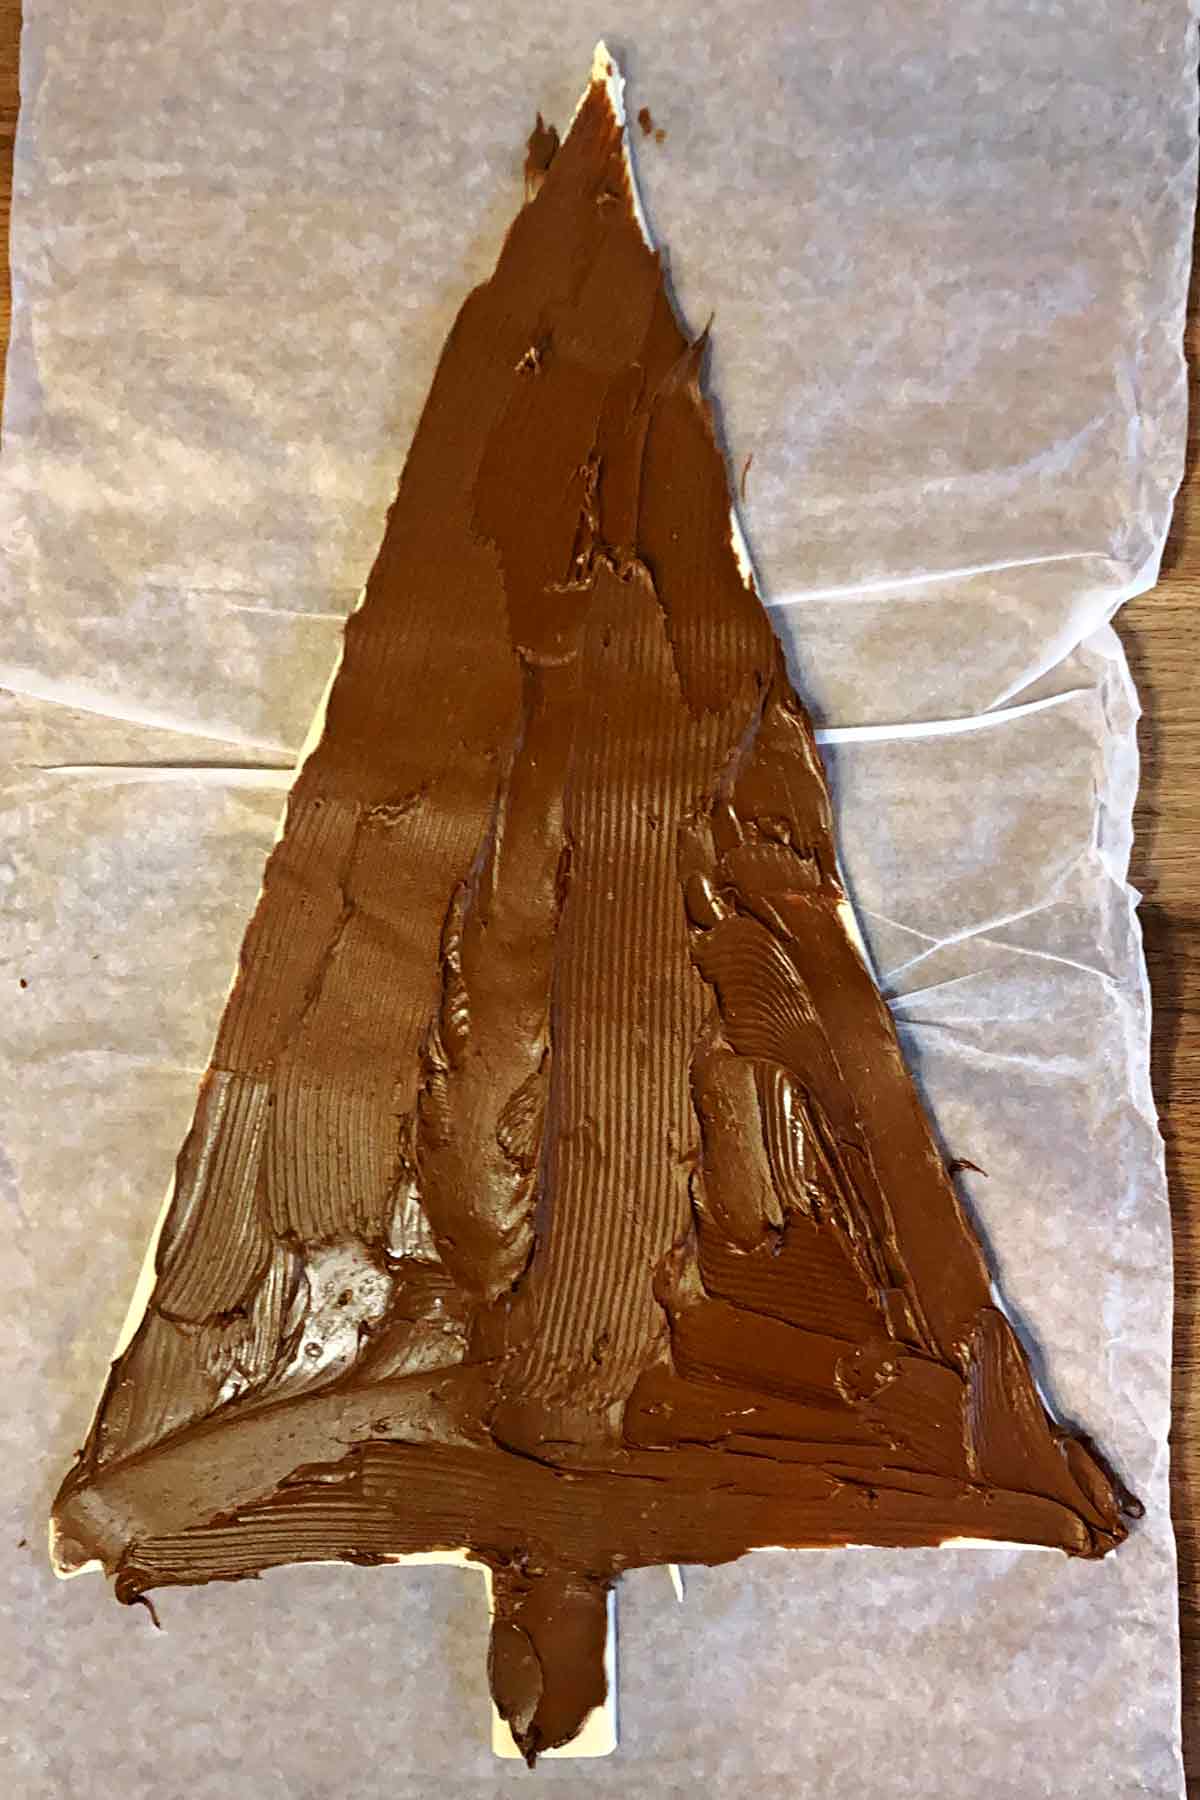 A tree shape cut from pastry covered in chocolate spread.